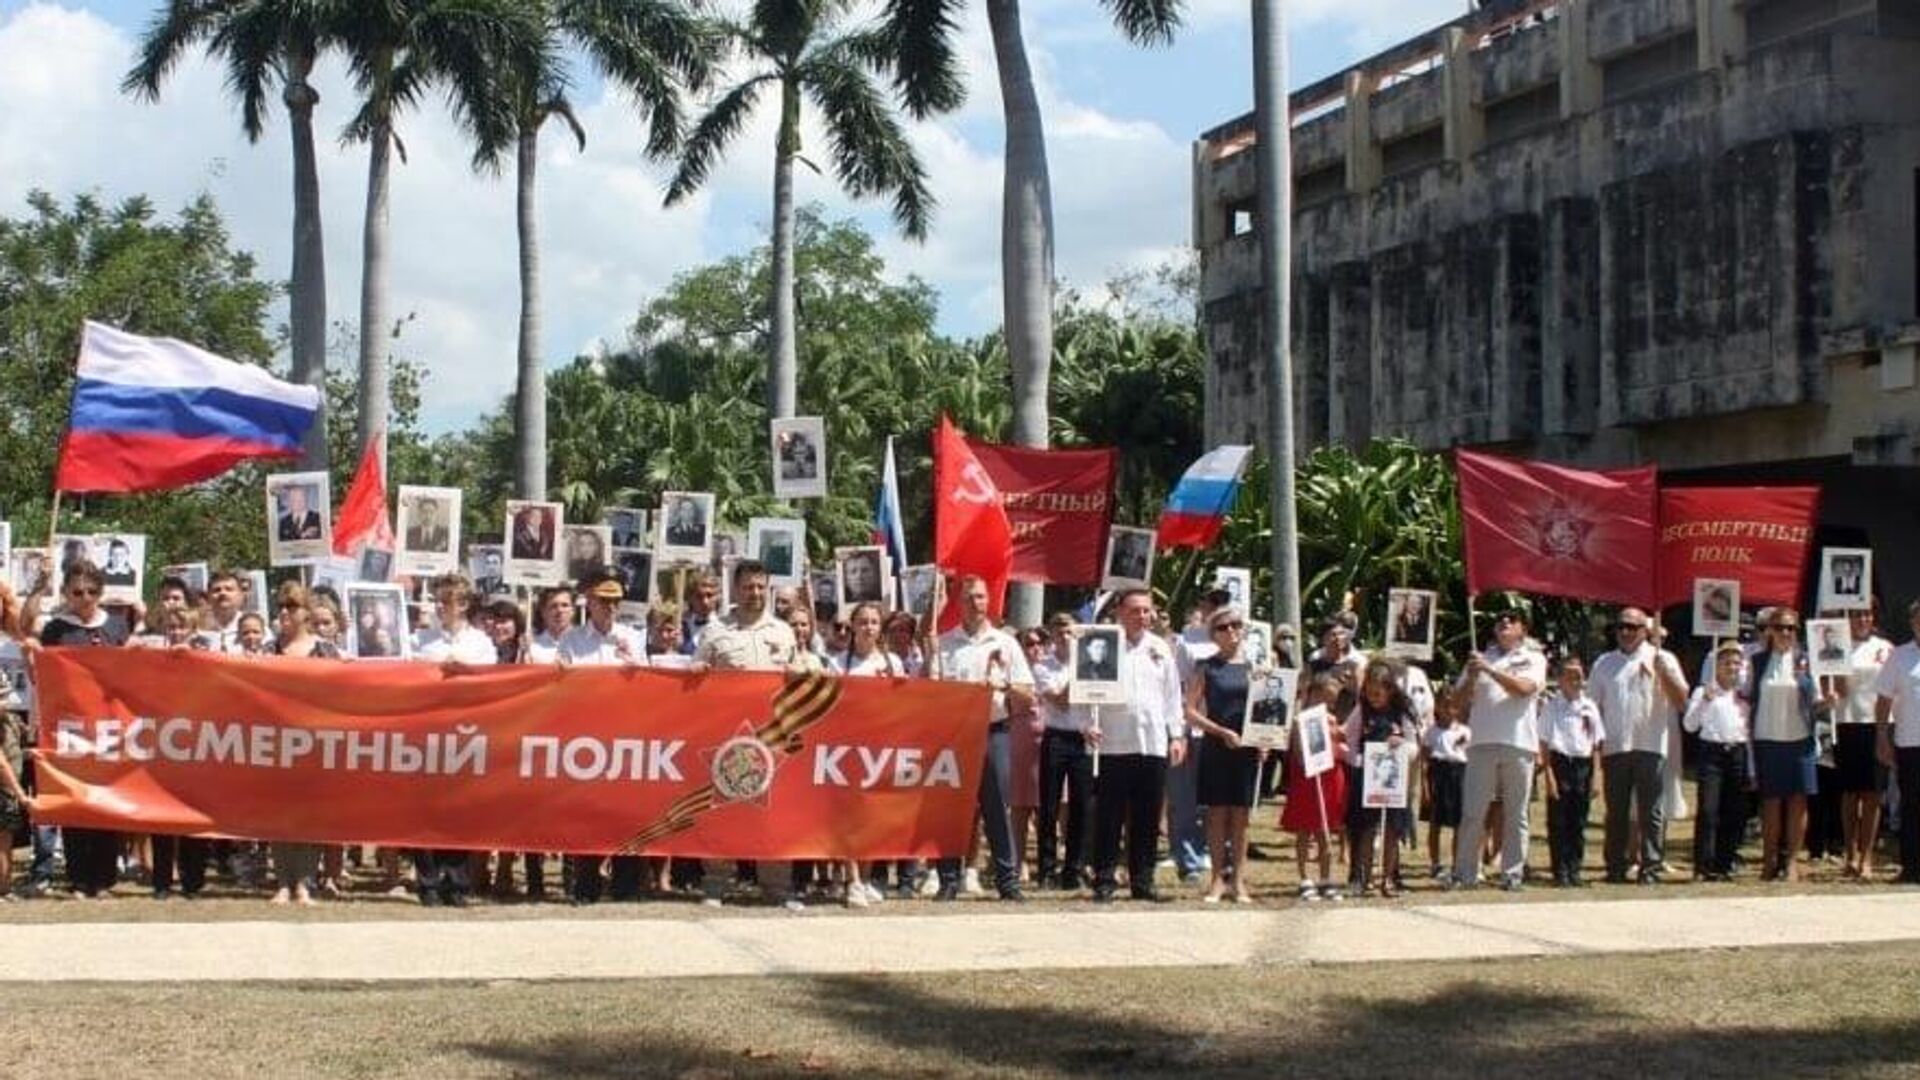 About 300 people participated in the Immortal Regiment march in the capital of Cuba, commemorating the 77th anniversary of the end of World War II - Sputnik International, 1920, 09.05.2022